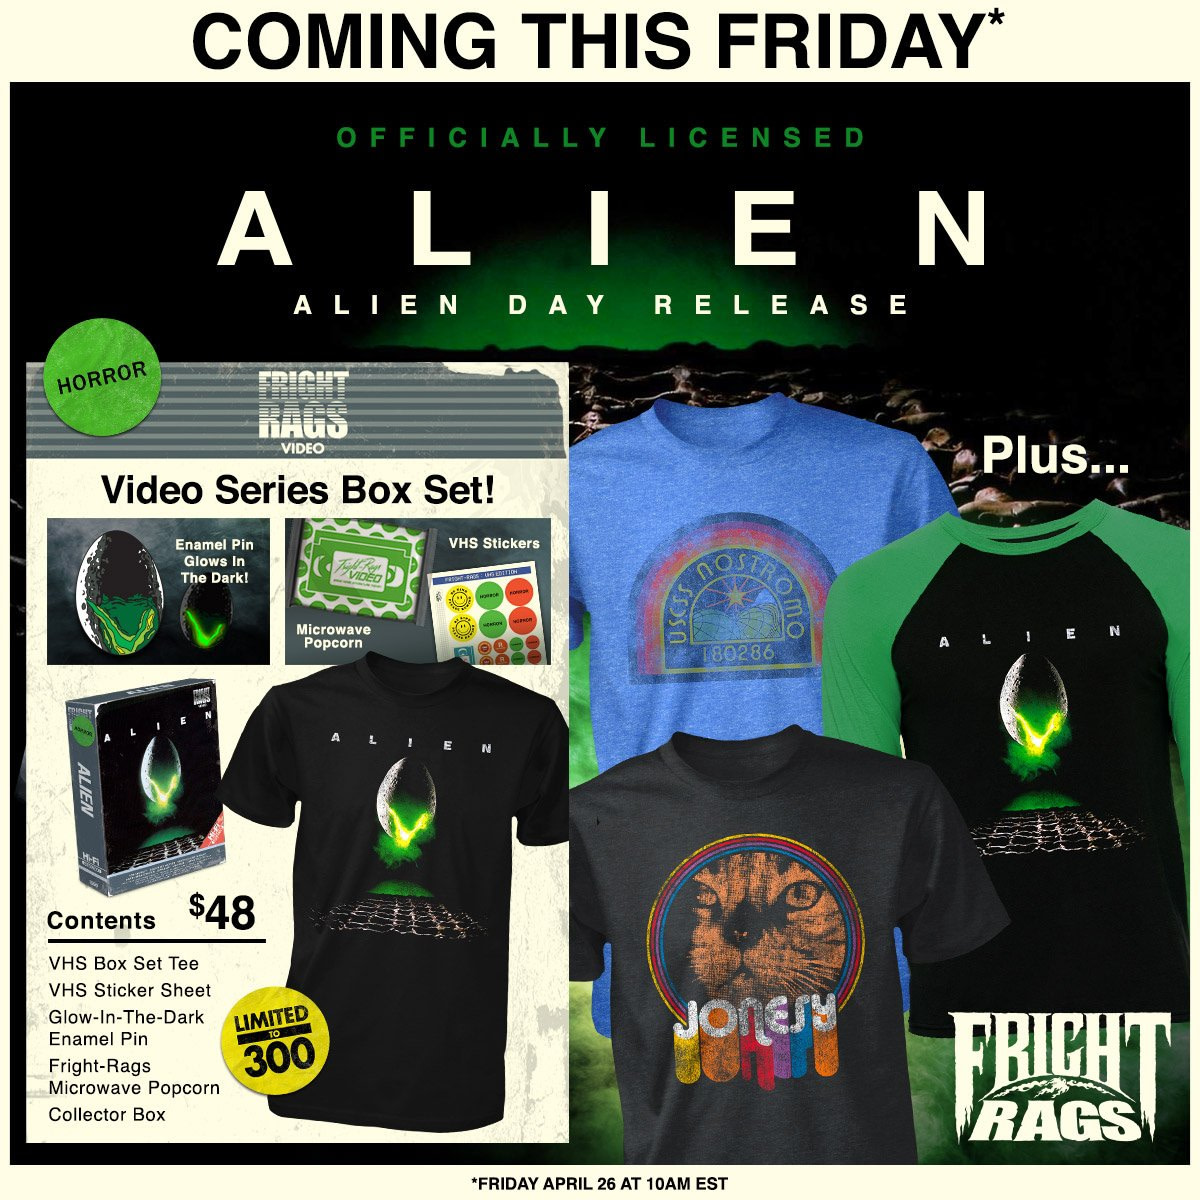 Happy Alien Day! Here are Some of the Things You Can Buy Today to